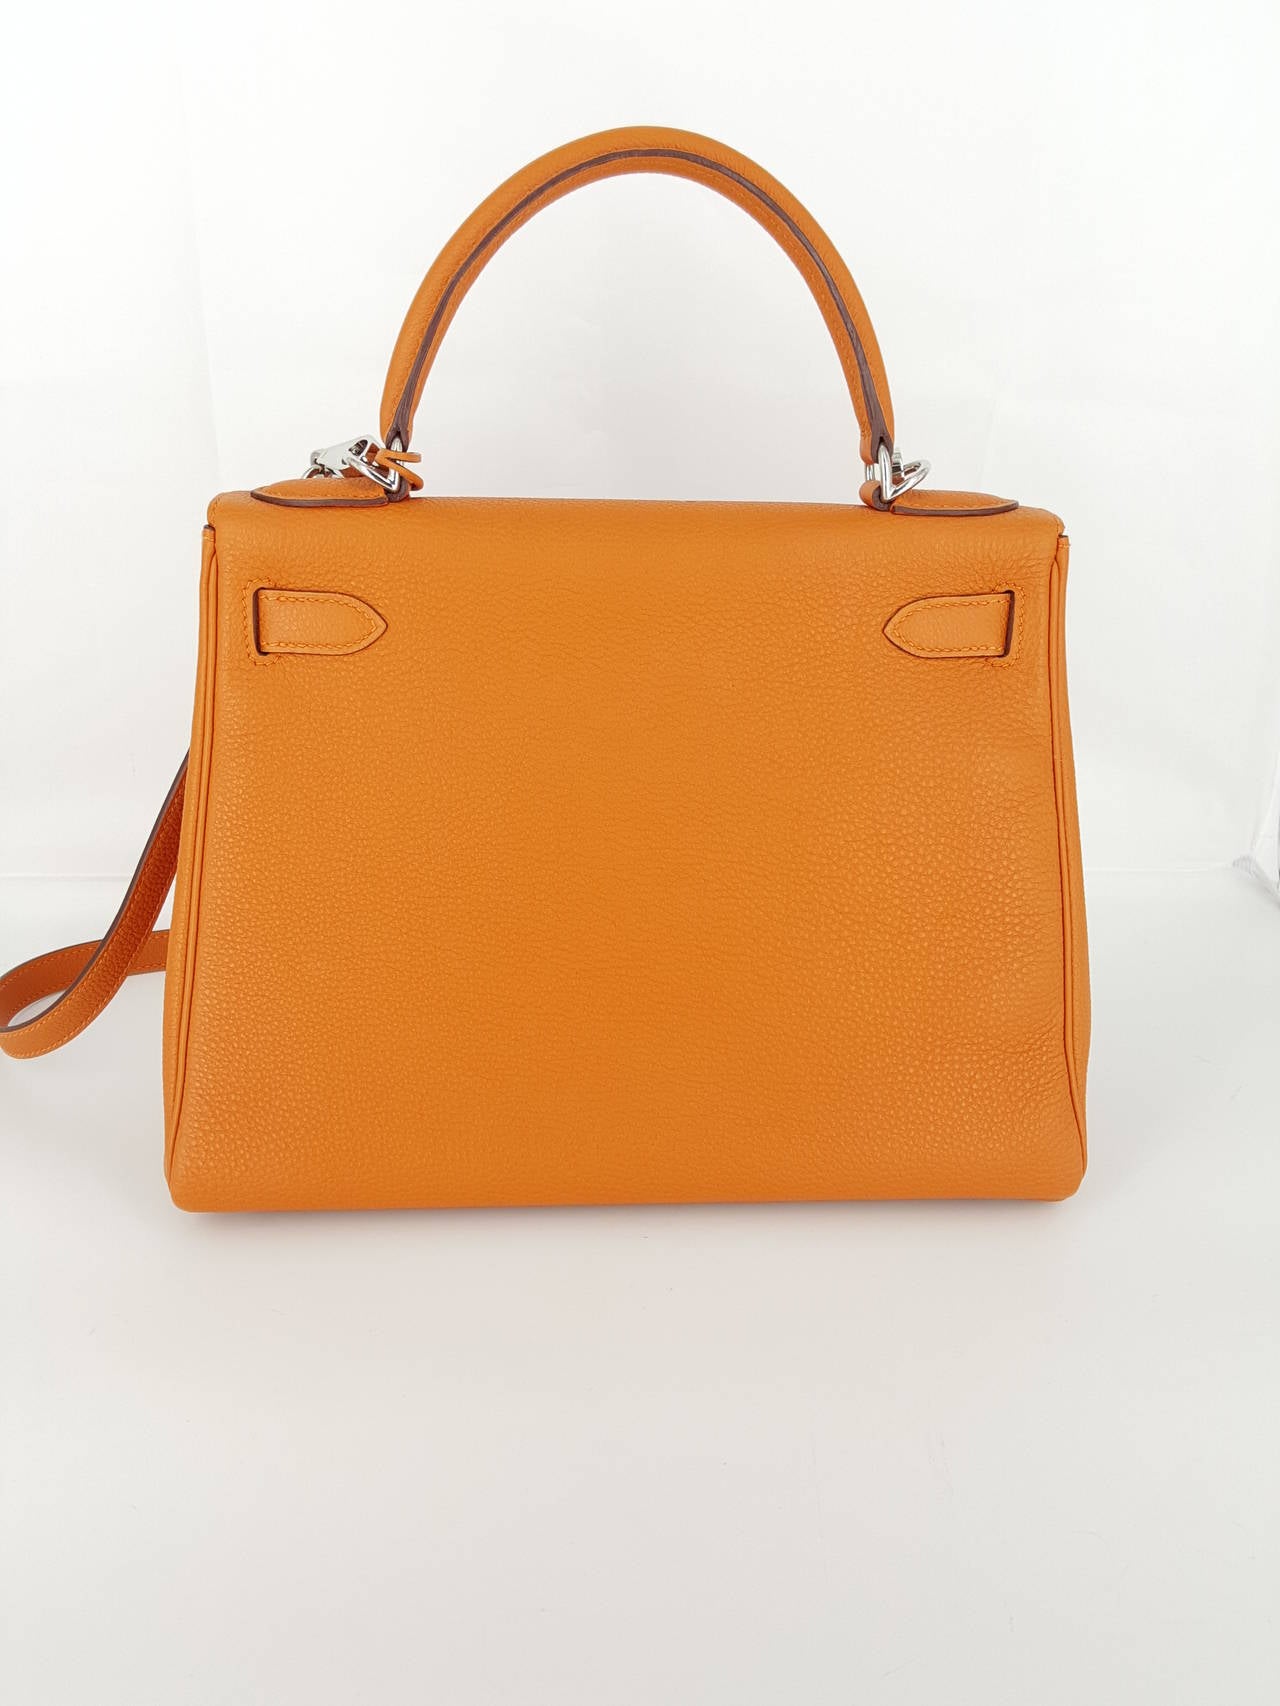 Offered for sale is this HERMES Kelly bag in orange Togo leather with silver hardware from 2007.  This is one of the iconic bags from Hermes and in a very sought after color.  This has the appearance of never been used, and there is still plastic on